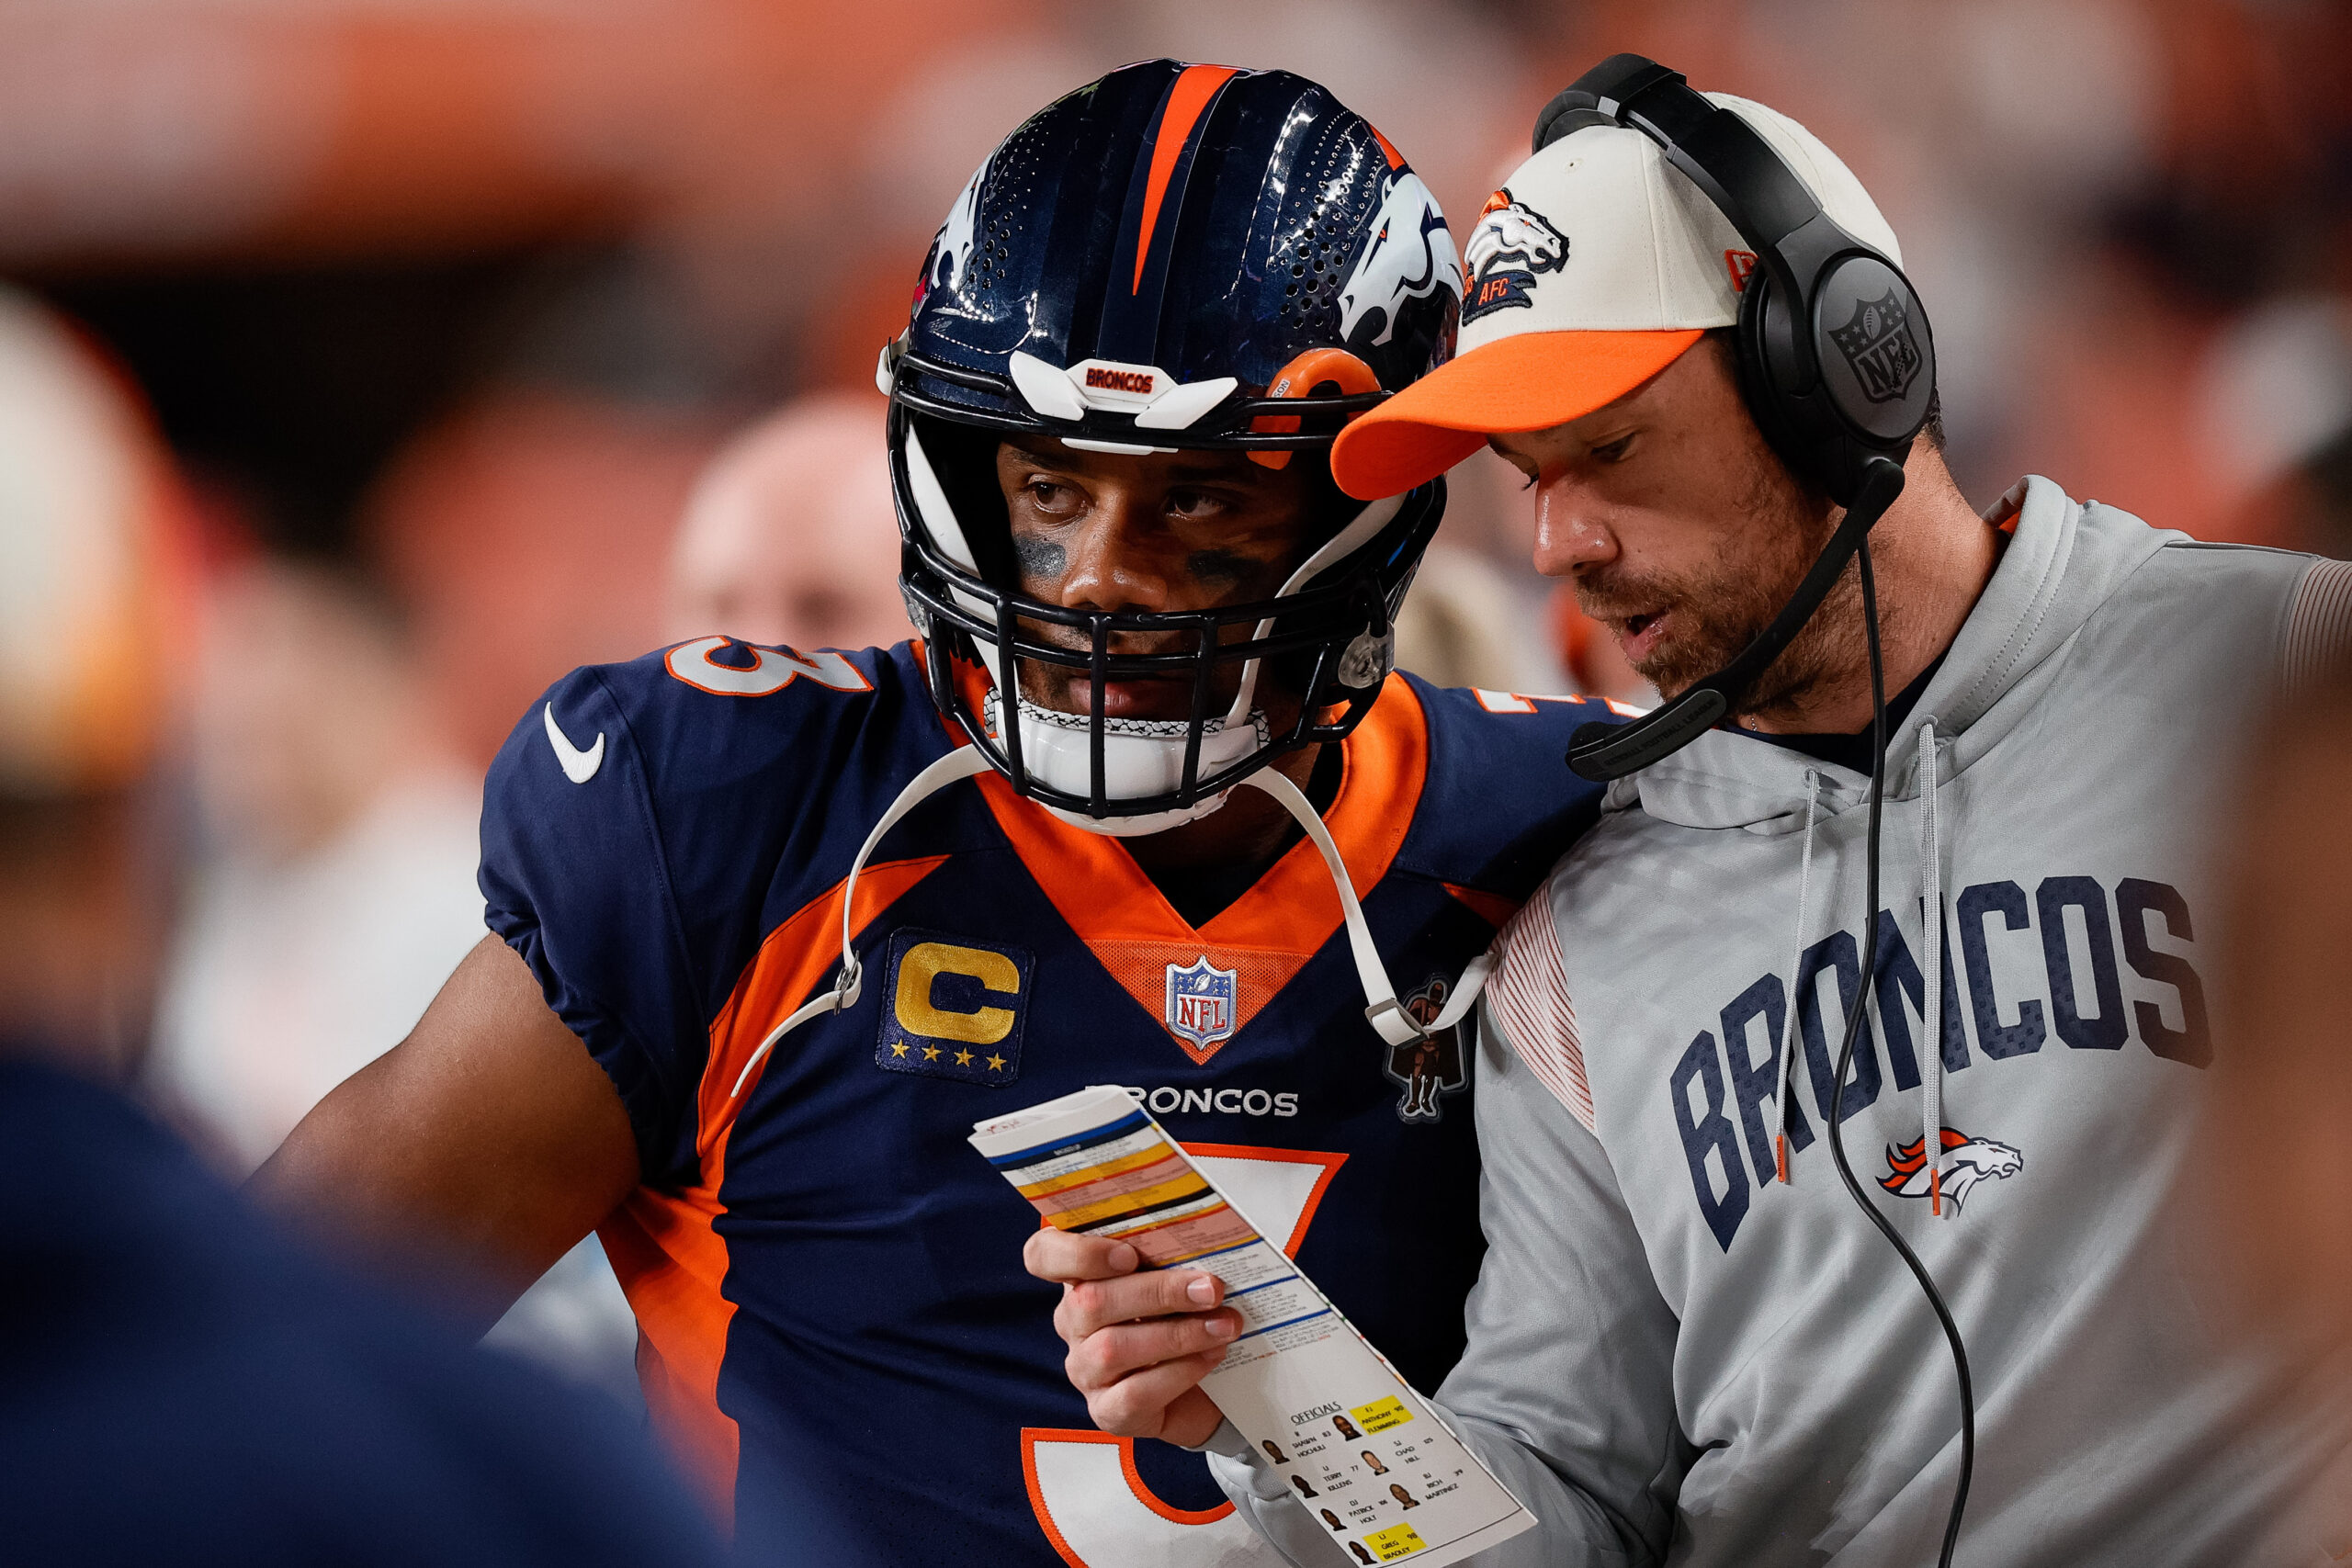 Klint Kubiak’s role change is going smoothly so far for Denver Broncos